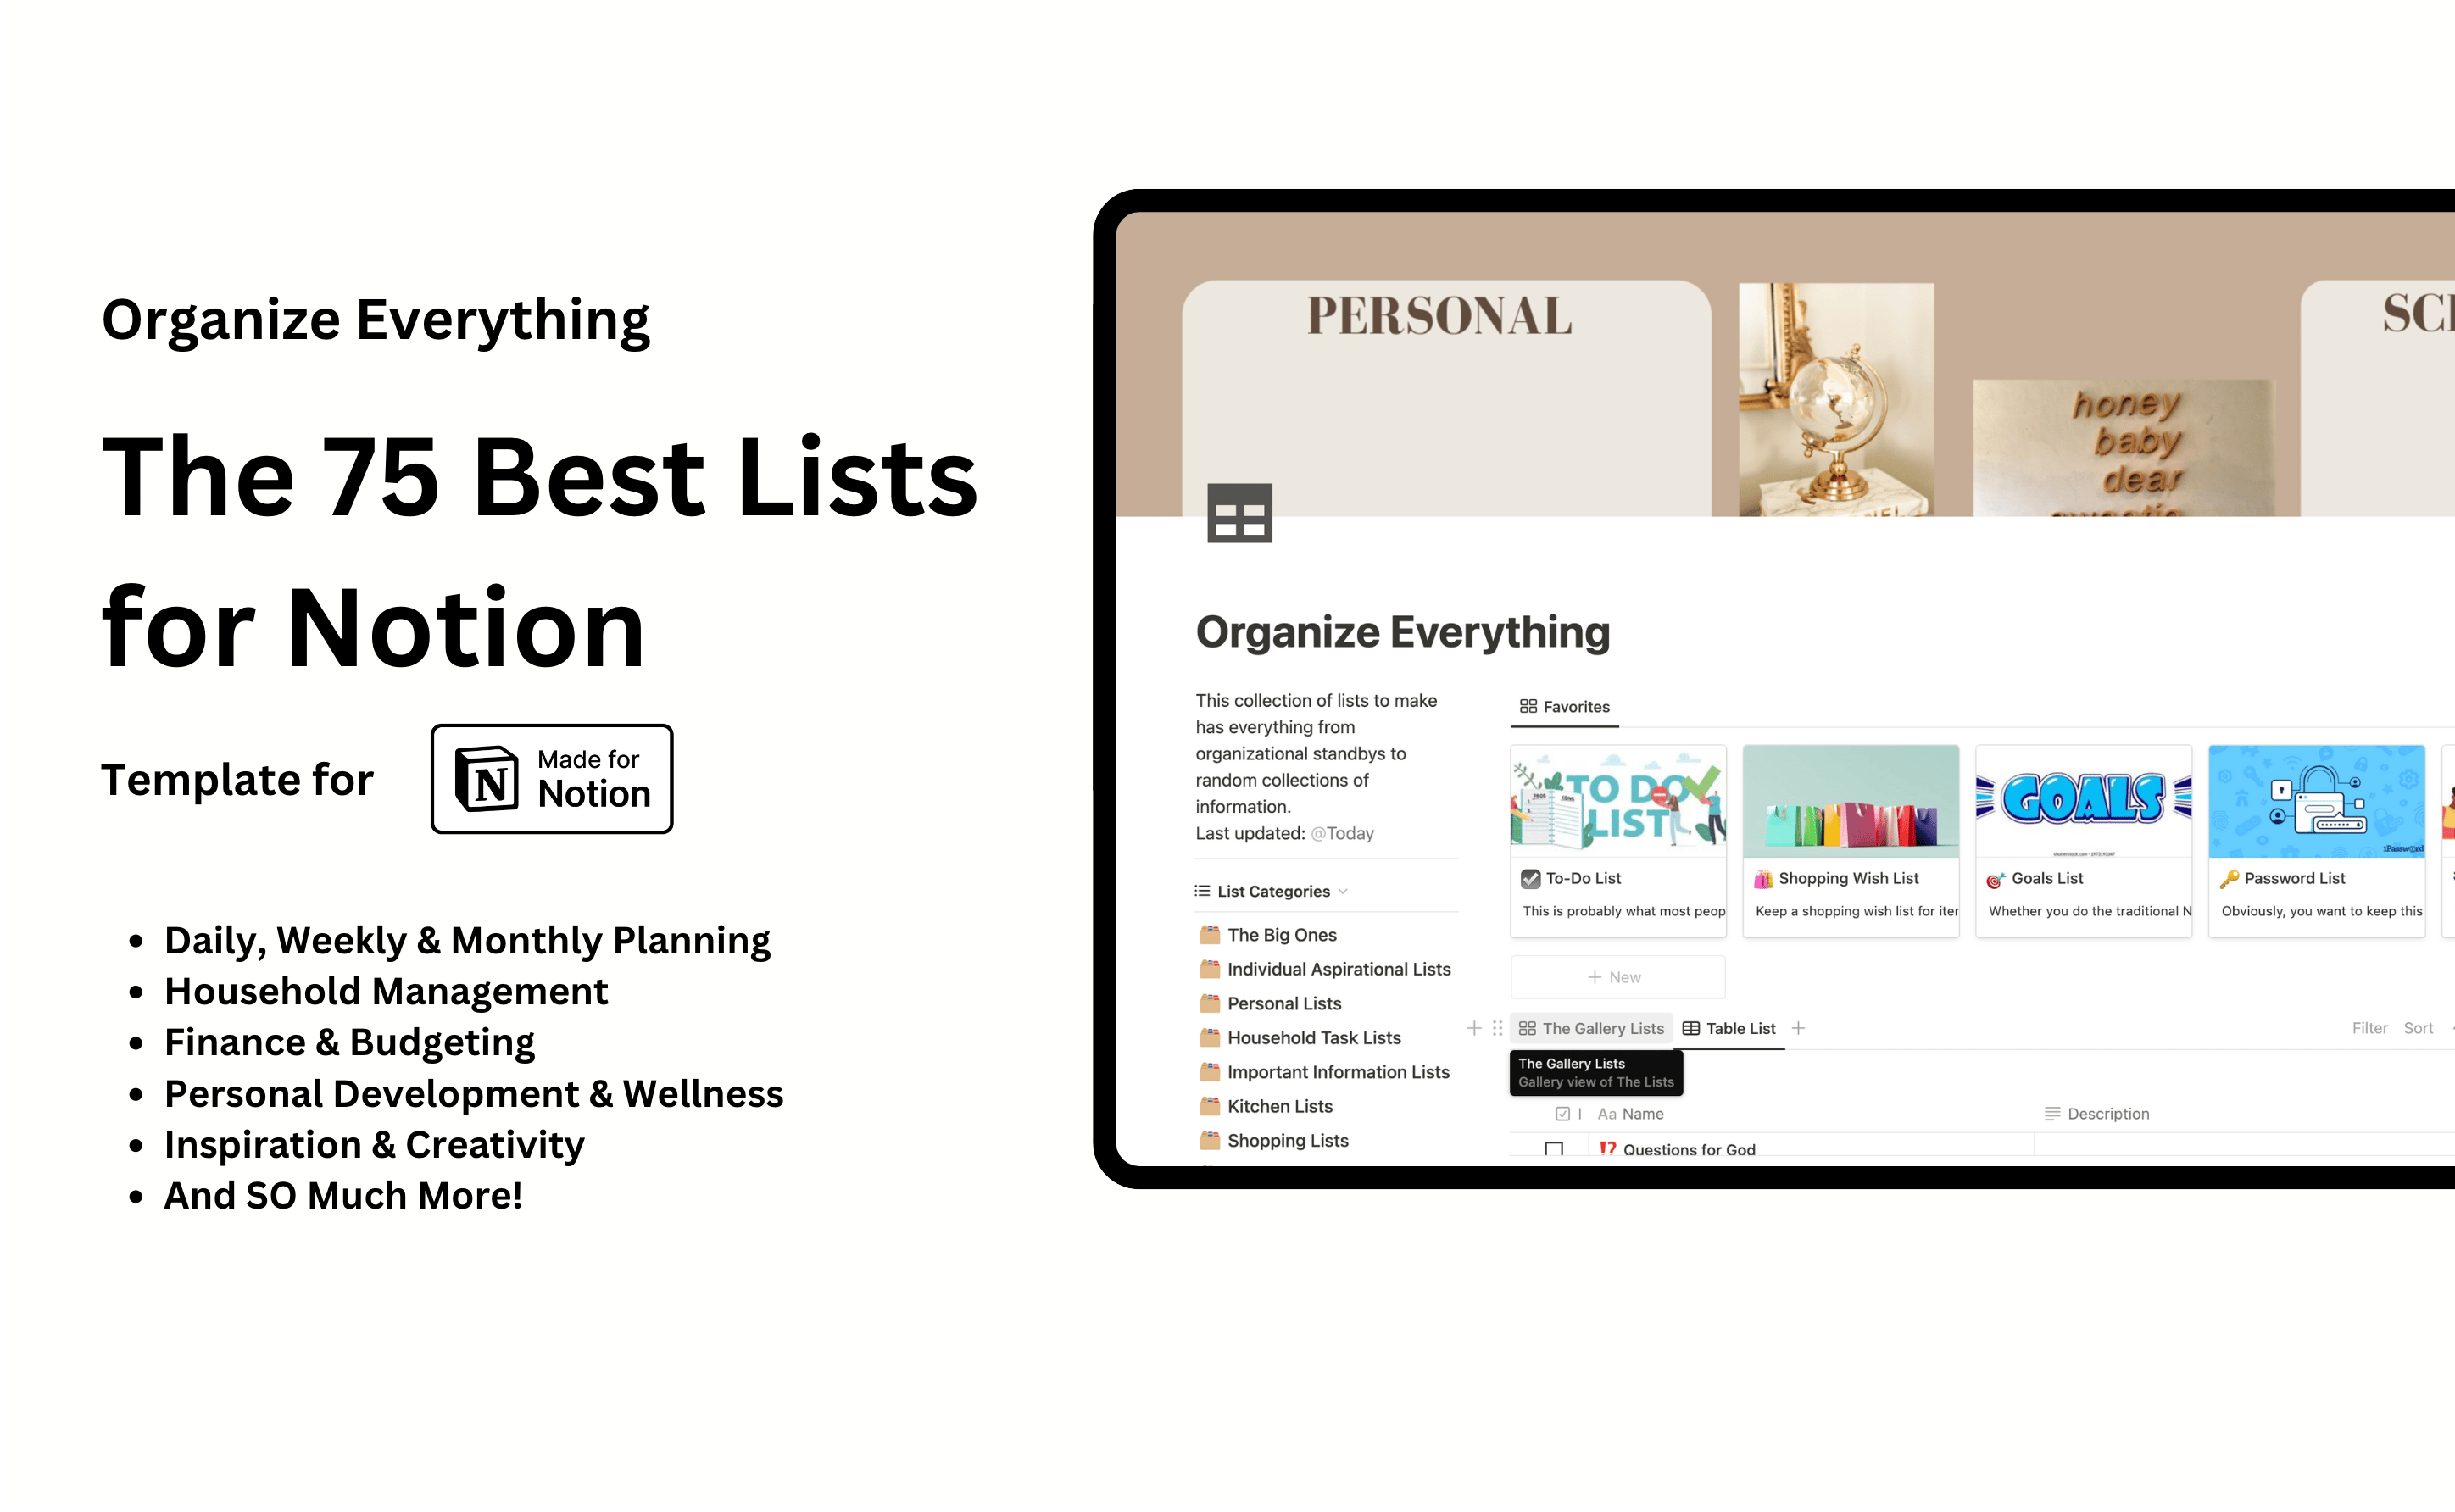 The 75 Best Lists to Make (to Organize Everything) includes everything you need to get organized